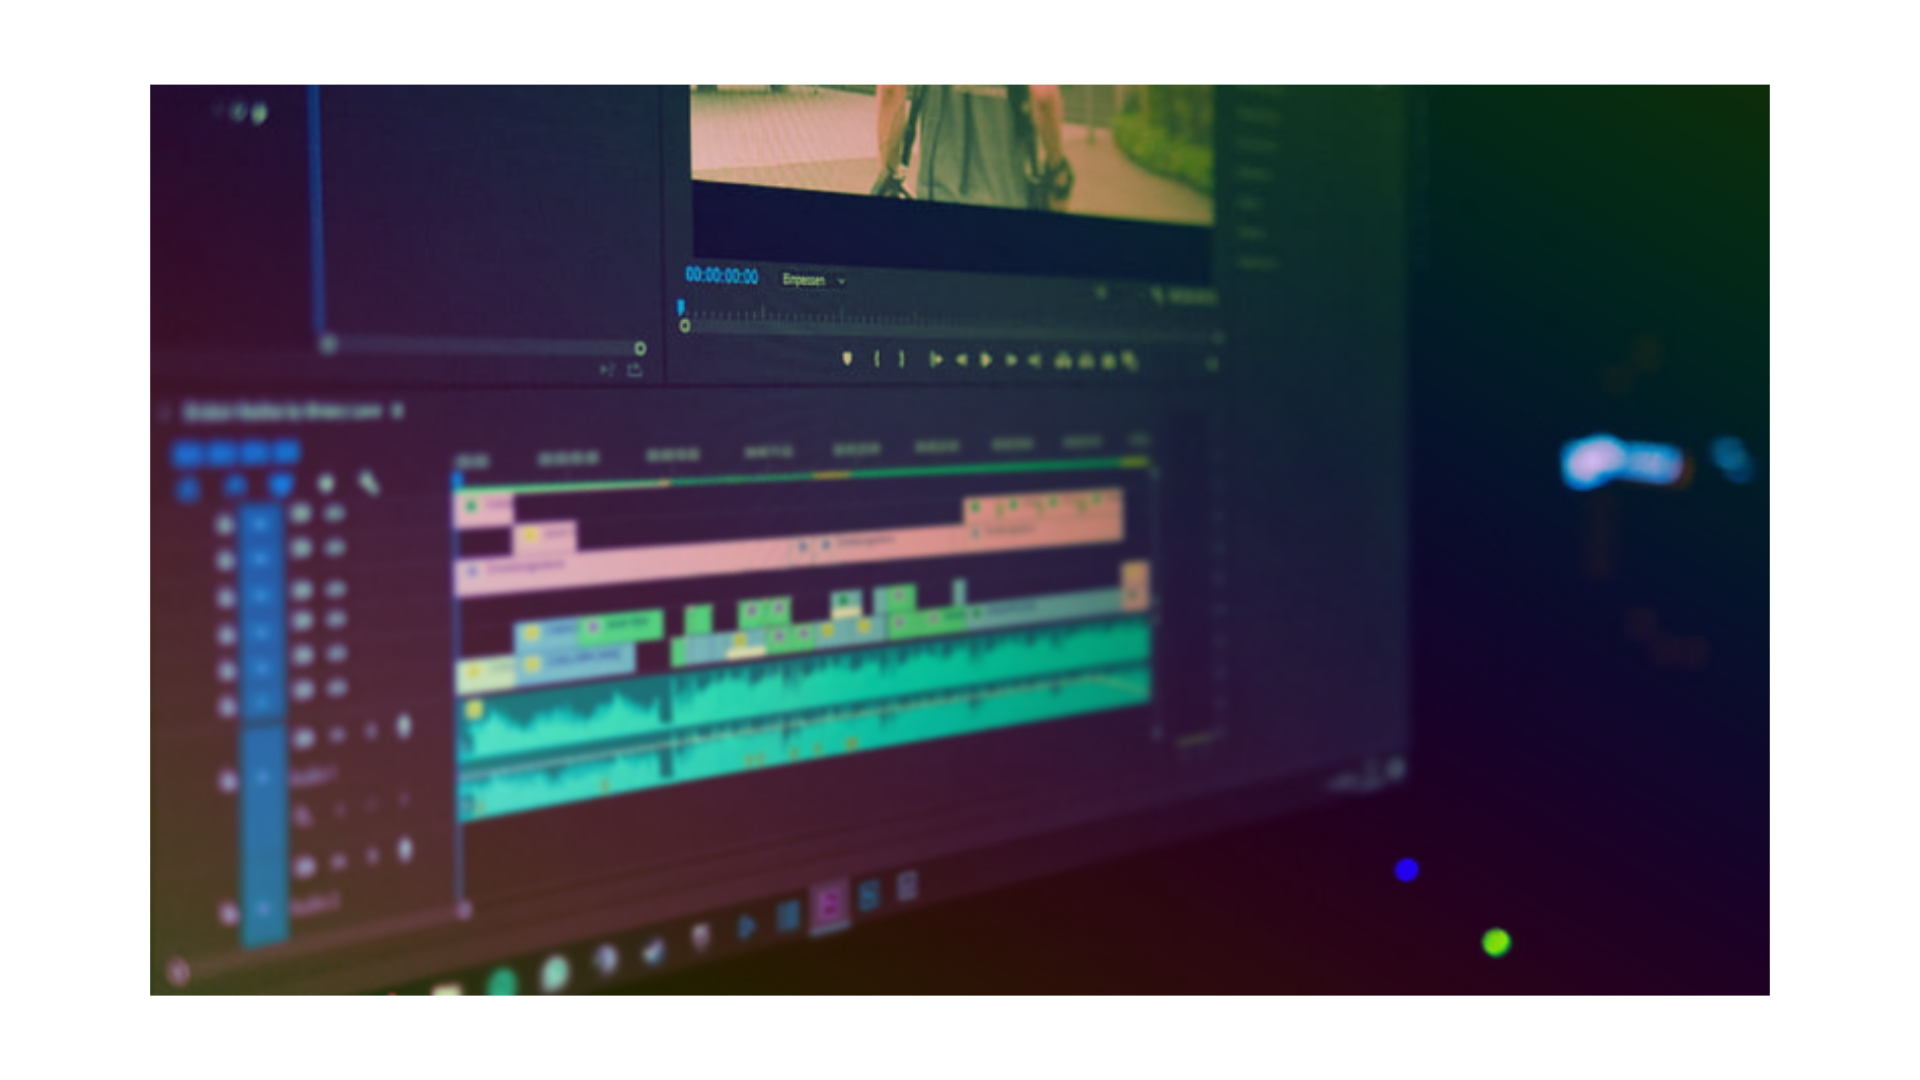 An angled, over the shoulder shot of a computer screen showing a work in progress on the Adobe Premiere editing timeline.